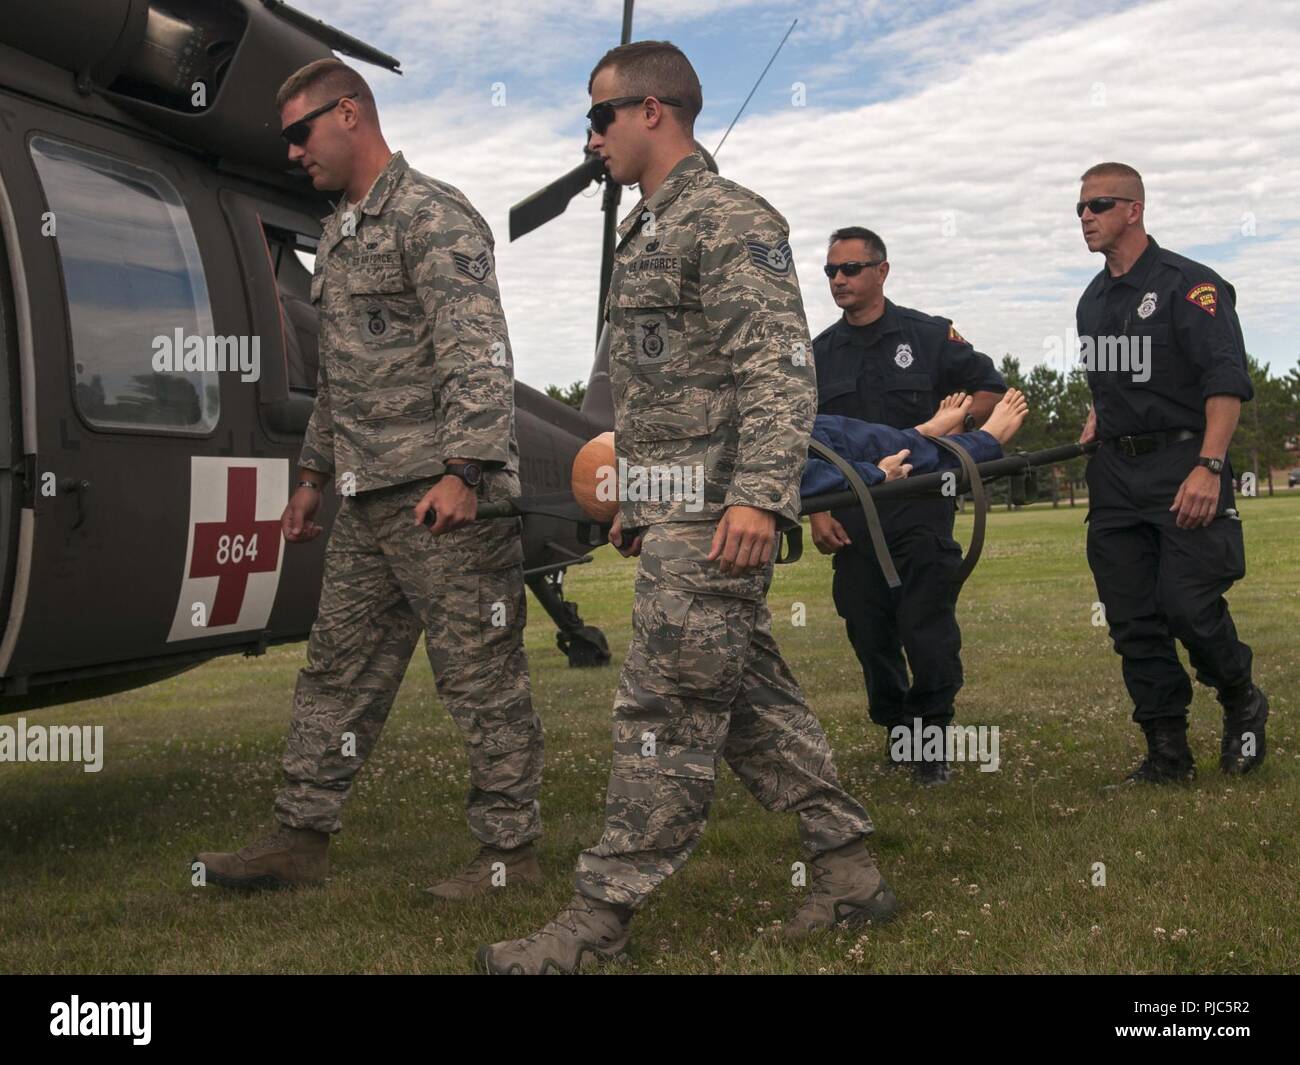 U.S. Air Force Security Forces and Medical Group Airmen from multiple units along with personnel from the Wisconsin State Patrol participated in Medical Evacuation (MEDEVAC) Training with the crew of a Wisconsin Army National Guard UH-60 Blackhawk helicopter during PATRIOT North 18 at Volk Field, Wis., July 16, 2018. PATRIOT is an annual domestic operations training exercise sponsored by the National Guard that focuses on increasing the ability of local, state and federal organizations to coordinate and work together in response to a natural disaster or man-made emergency. Stock Photo